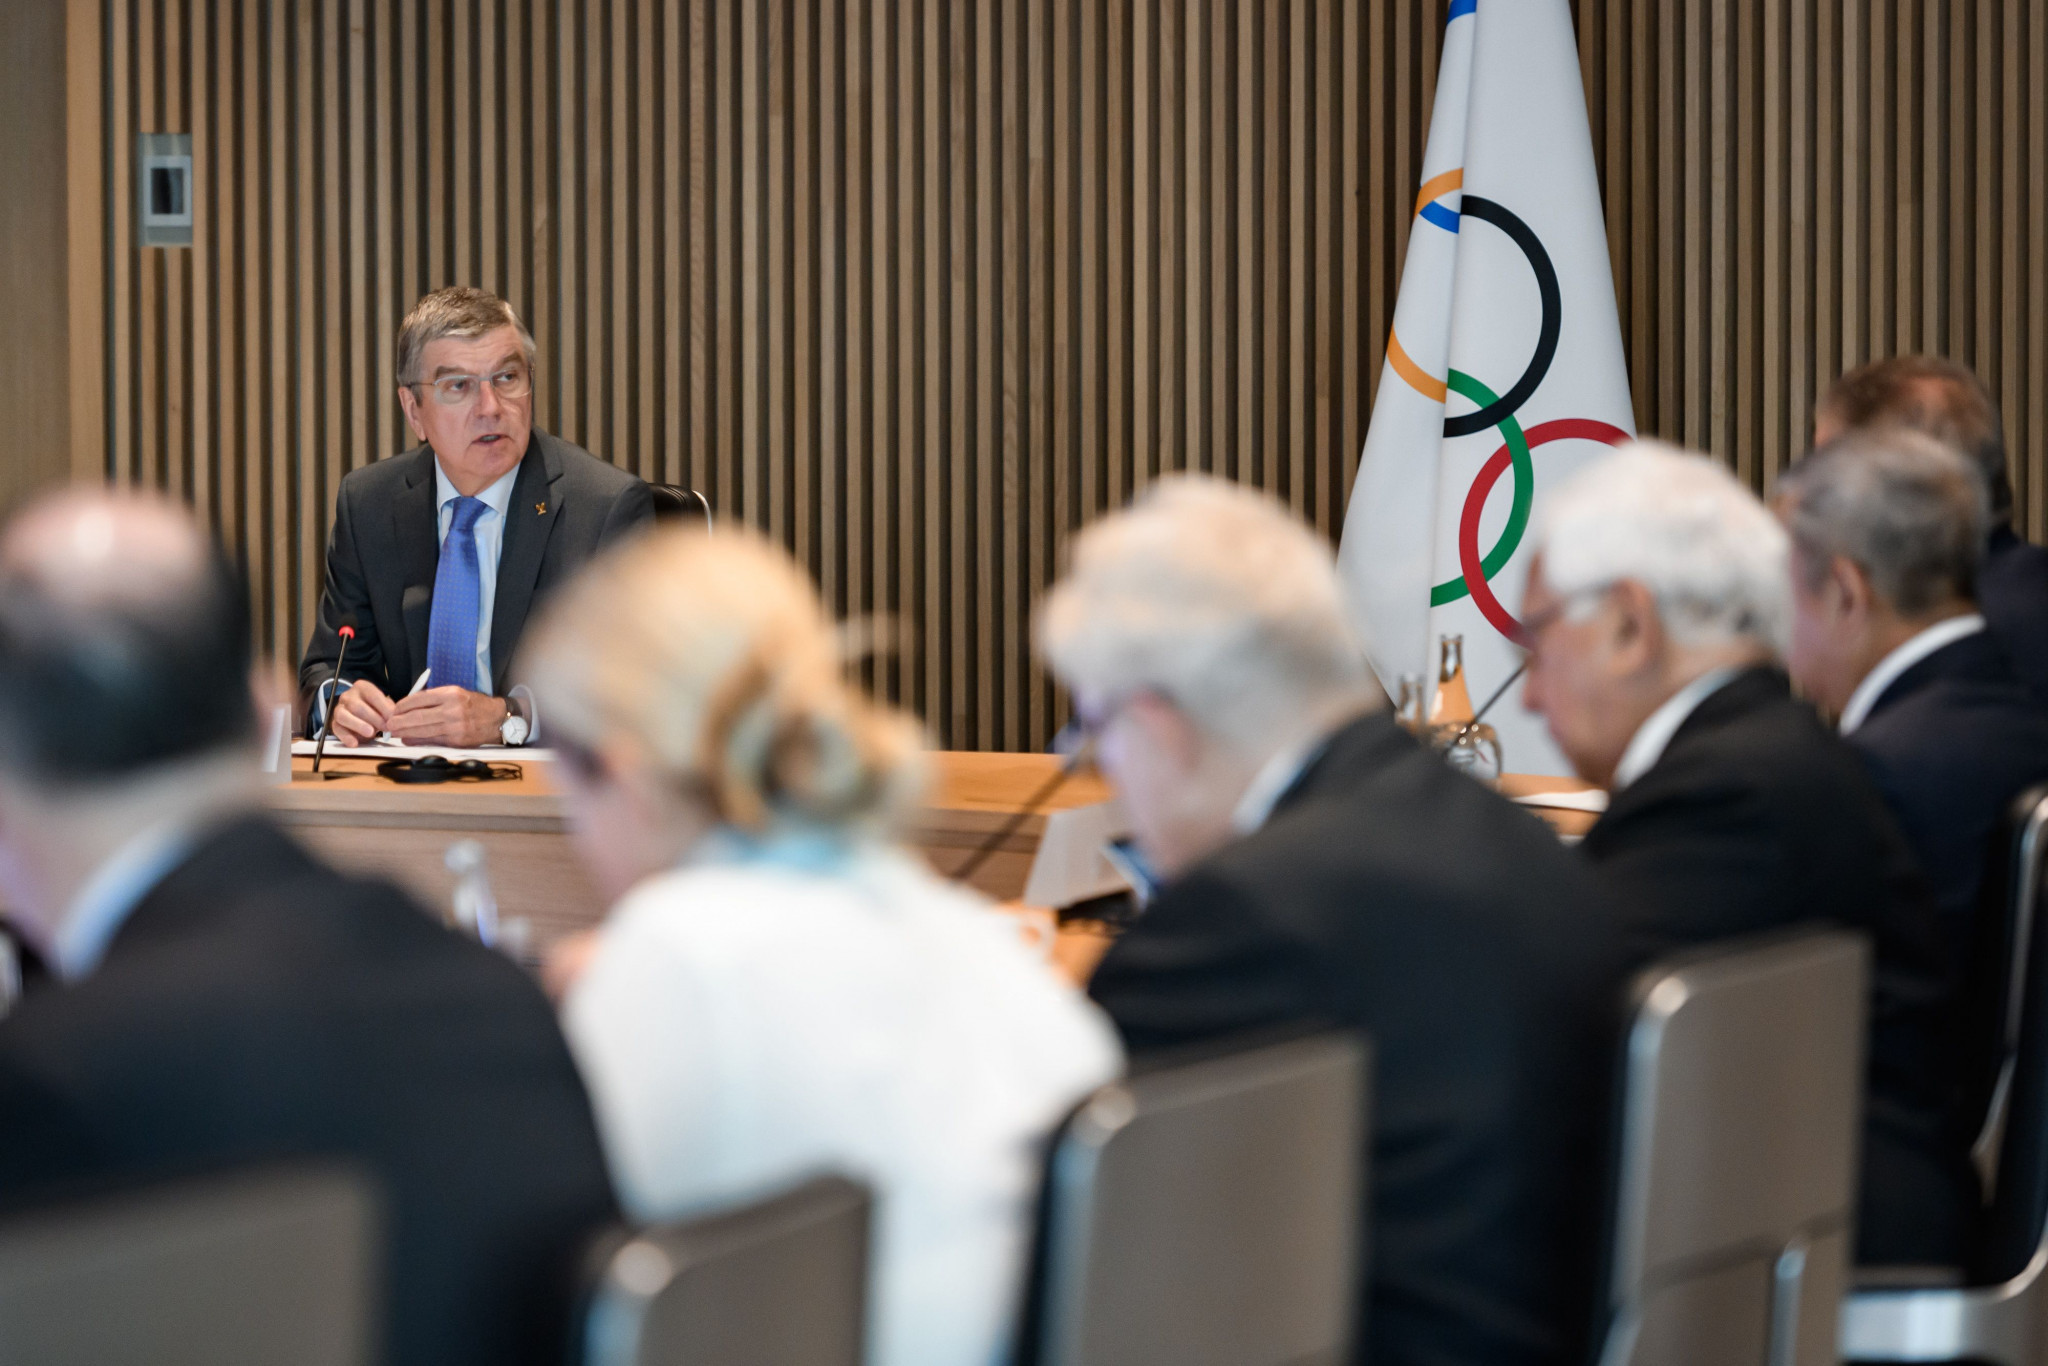 Next month's IOC Session is set to grant the International Federation Icestocksport full recognition ©Getty Images